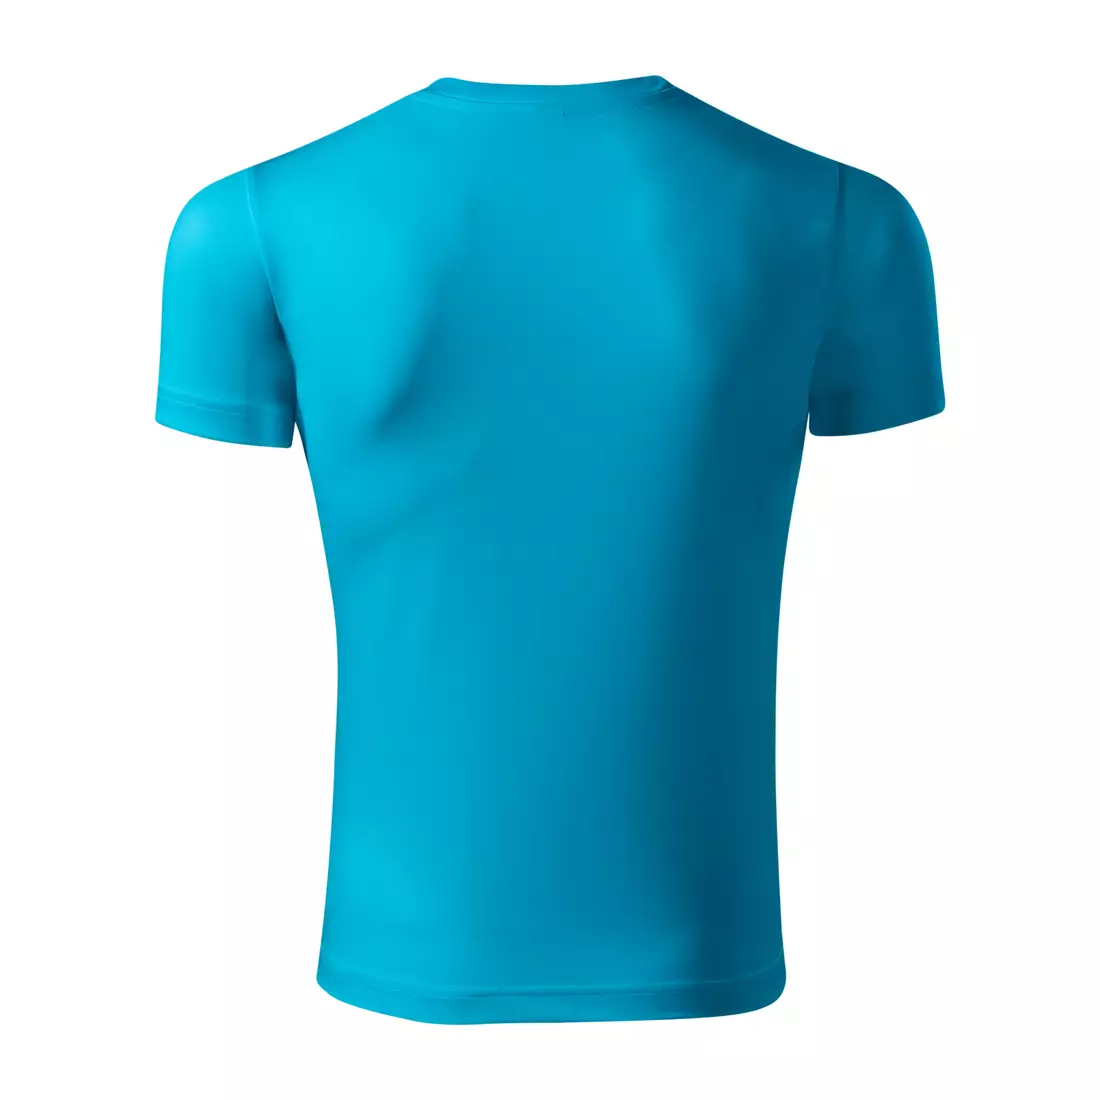 PICCOLIO PIXEL Sport T-Shirt, Short Sleeve, Men's, Turquoise, 100% Polyester P814412